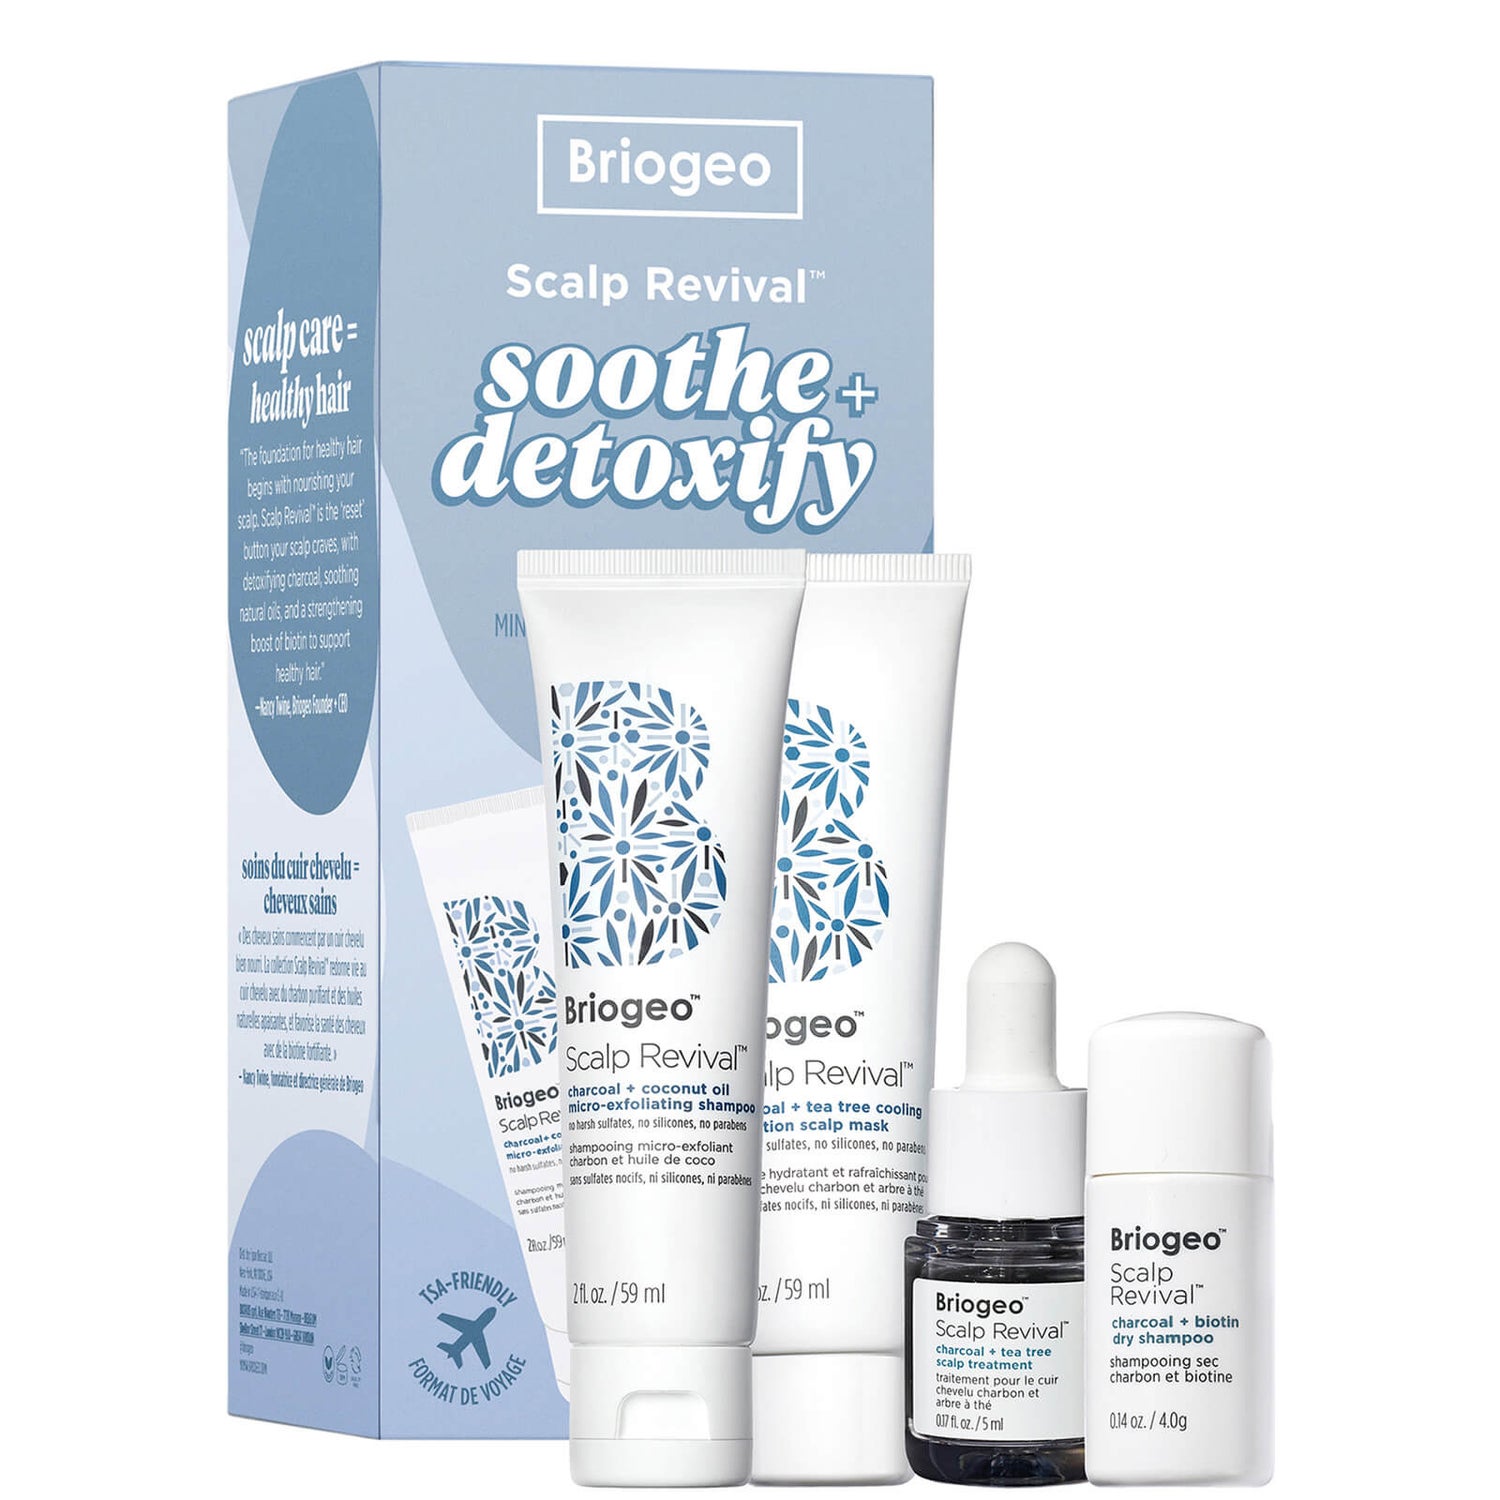 Briogeo Scalp Revival Soothe and Detoxify Hair Care Minis (Worth $38.00)